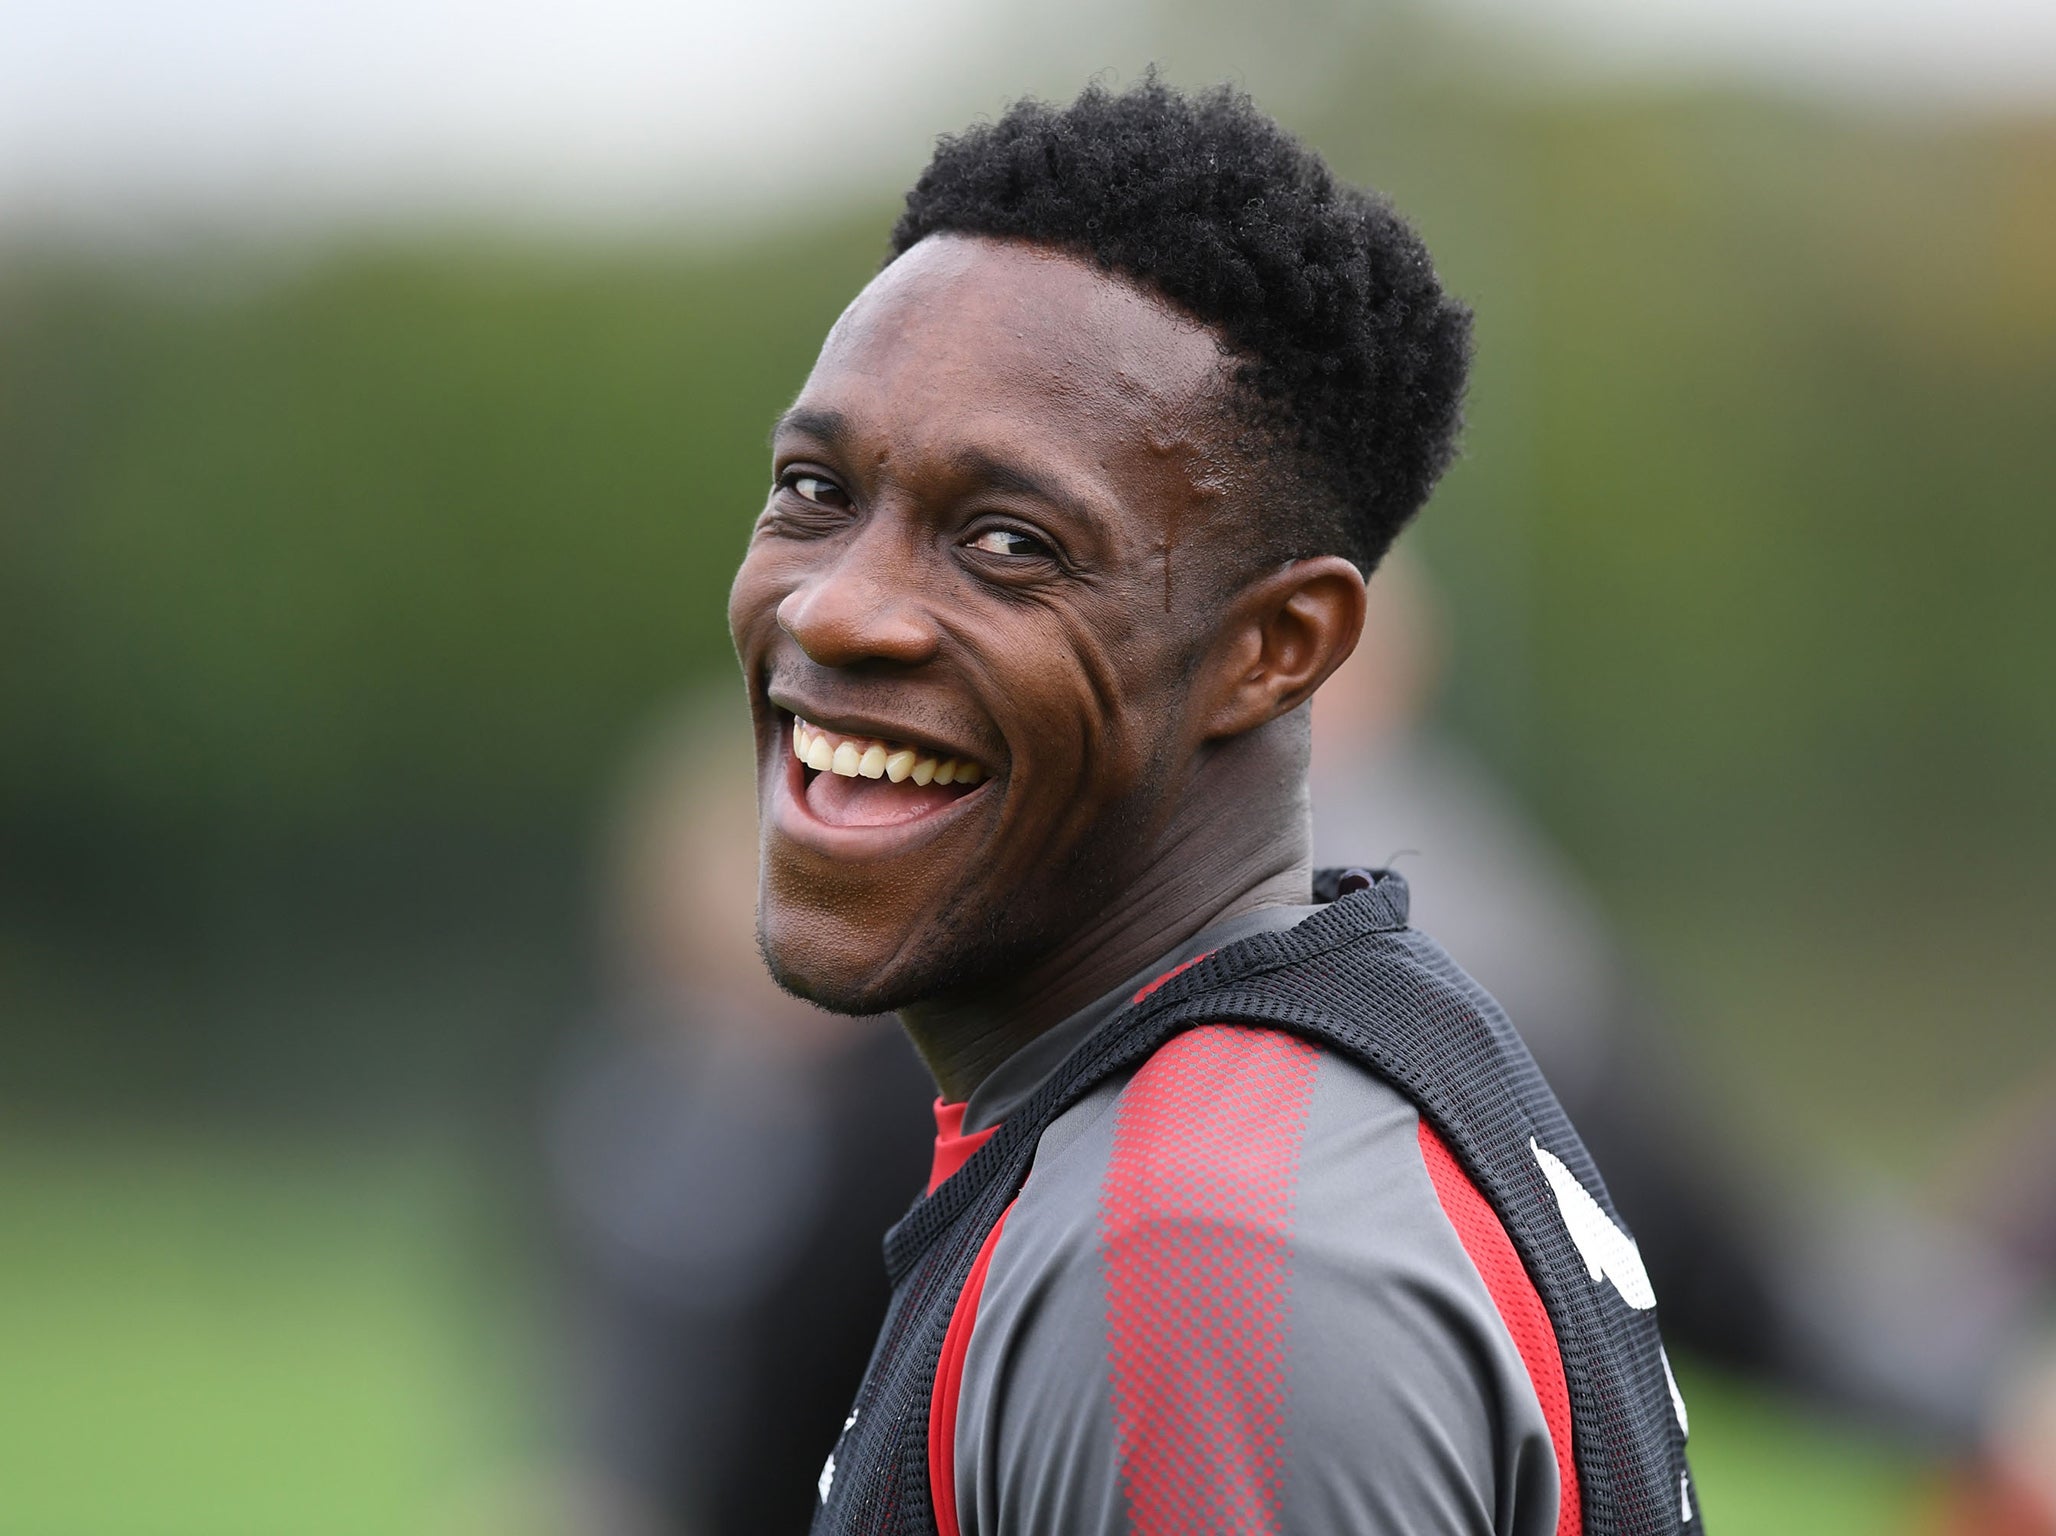 George Boateng thinks Danny Welbeck is good enough to play for City